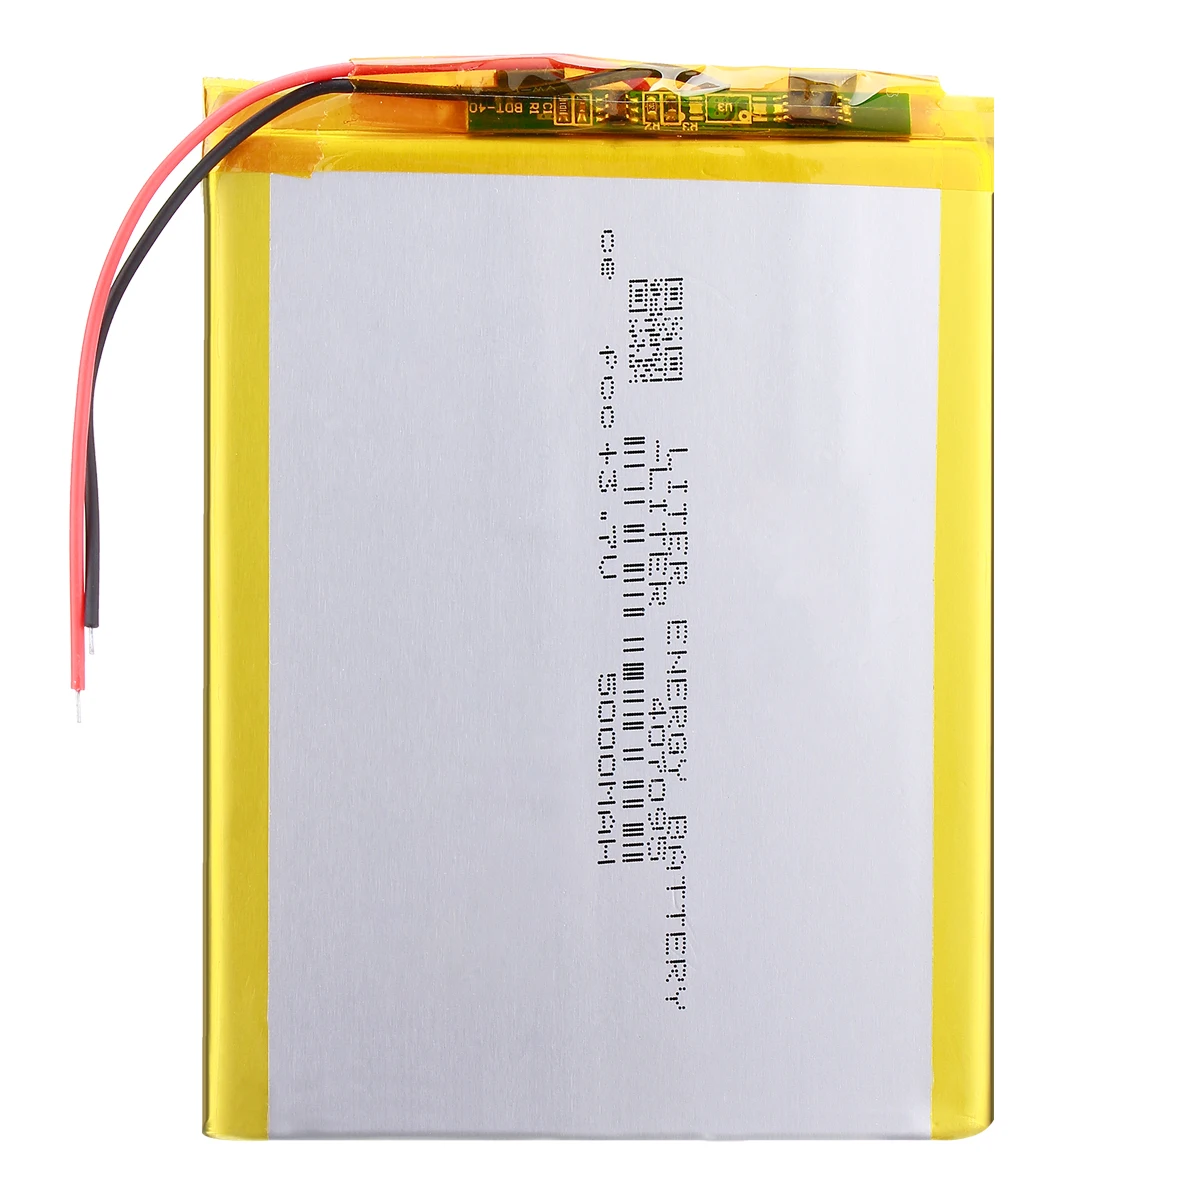 3.7V 5000mah (polymer lithium ion battery) Li-ion battery for tablet pc 7 inch MP3 MP4 [407095] replace High capacity